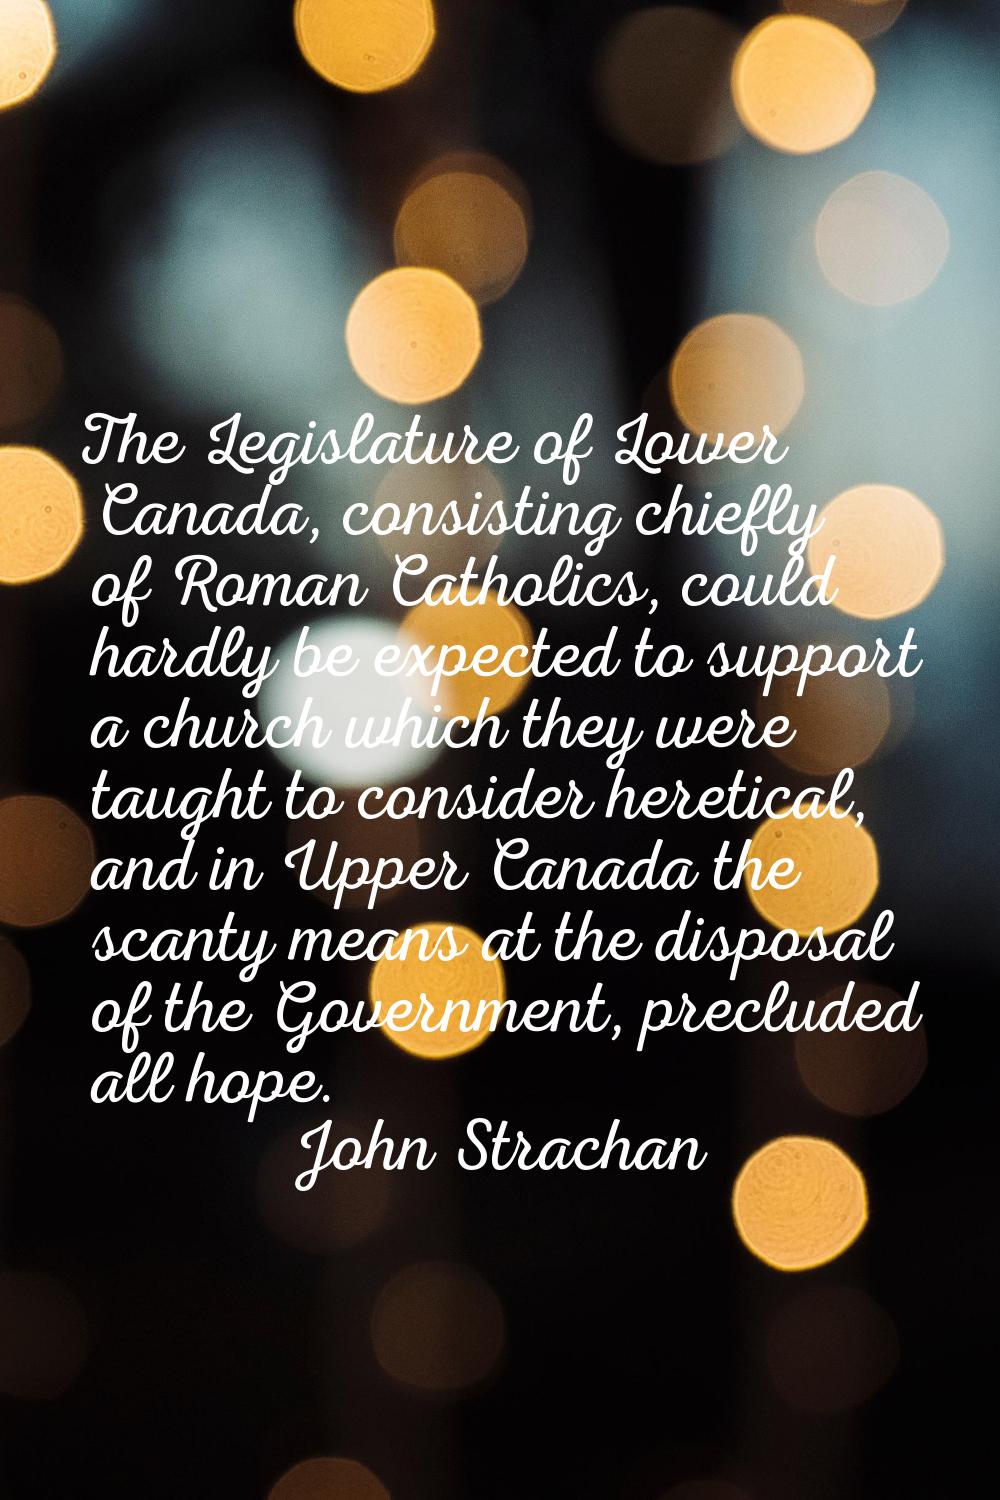 The Legislature of Lower Canada, consisting chiefly of Roman Catholics, could hardly be expected to